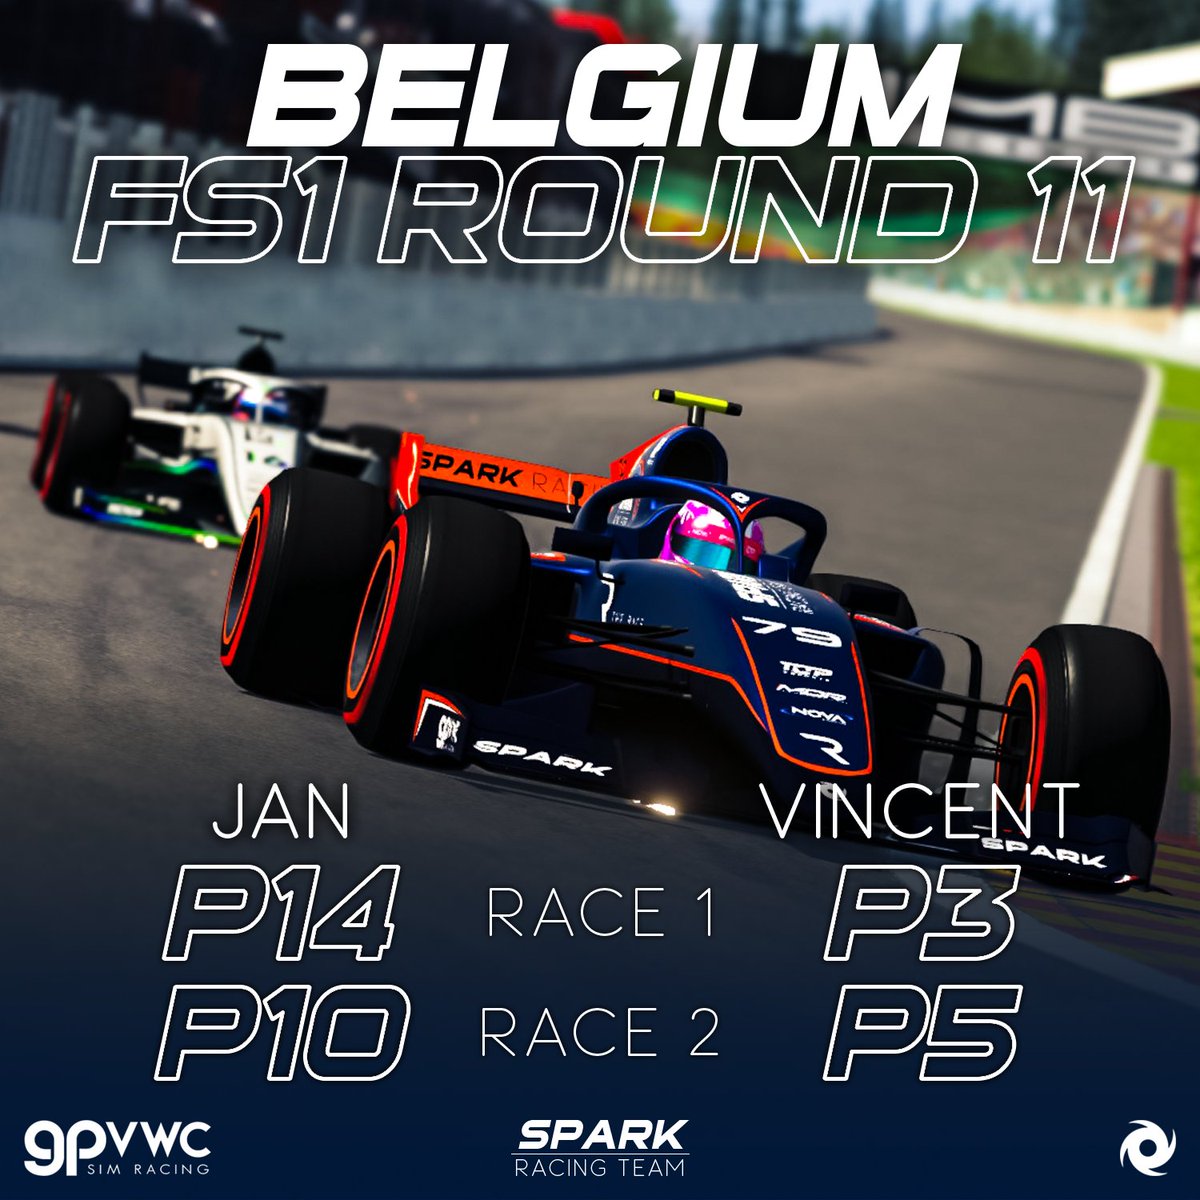 Finally it was time for Vincent to shine and although Tom could not be there, Jan was able to score important points for the team. #gpvwc #FS1 #Simracing #eSports #spa #BelgianGP #top